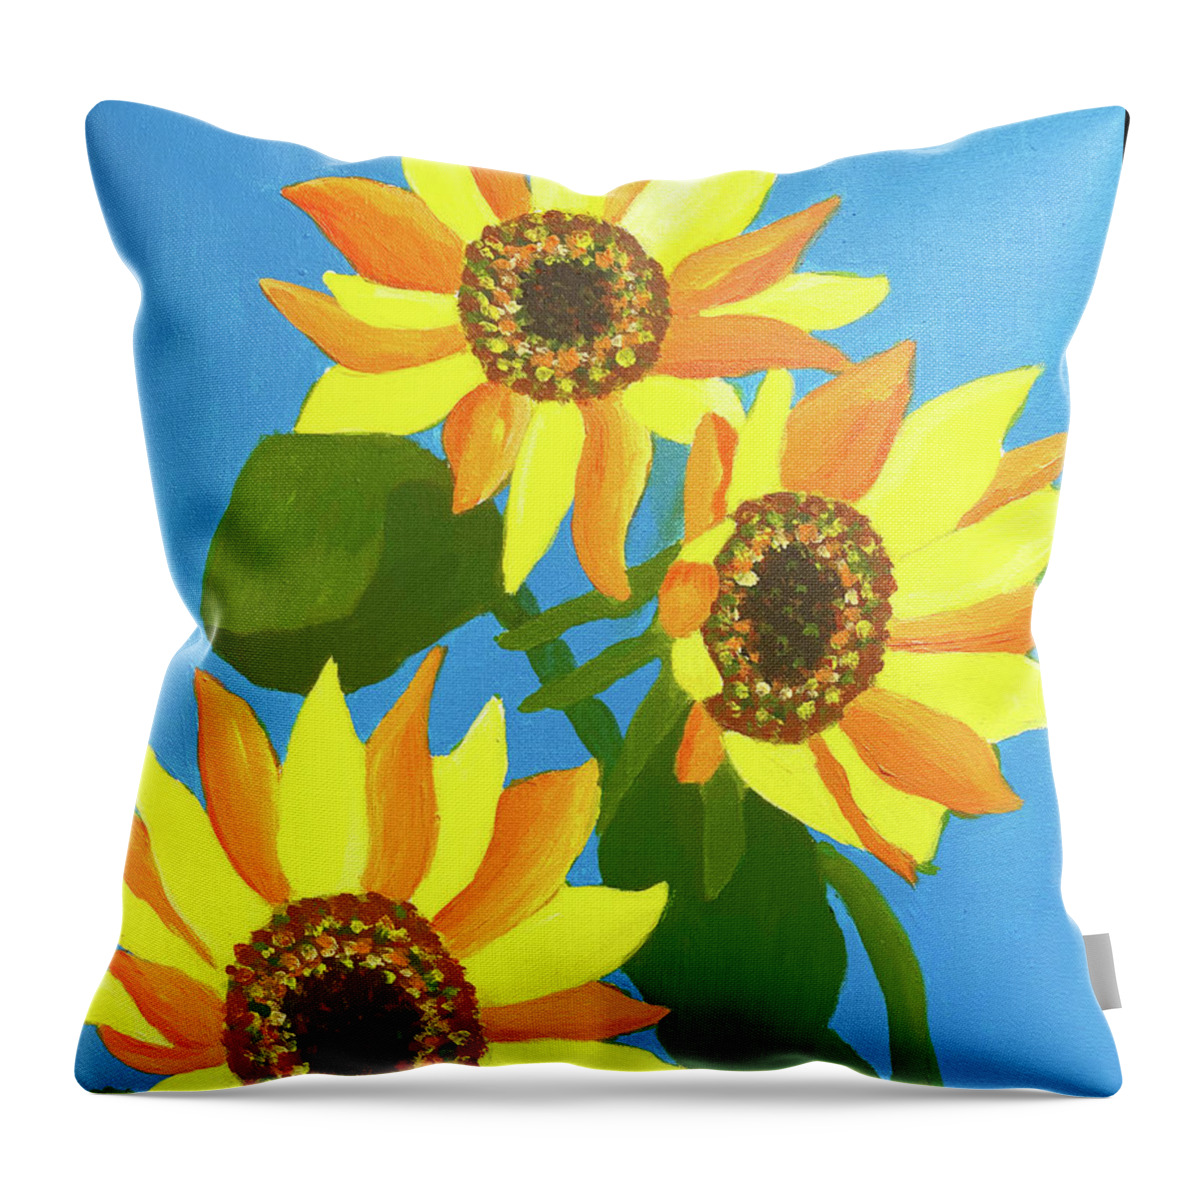 Sunflower Throw Pillow featuring the painting Sunflowers Three by Christina Wedberg